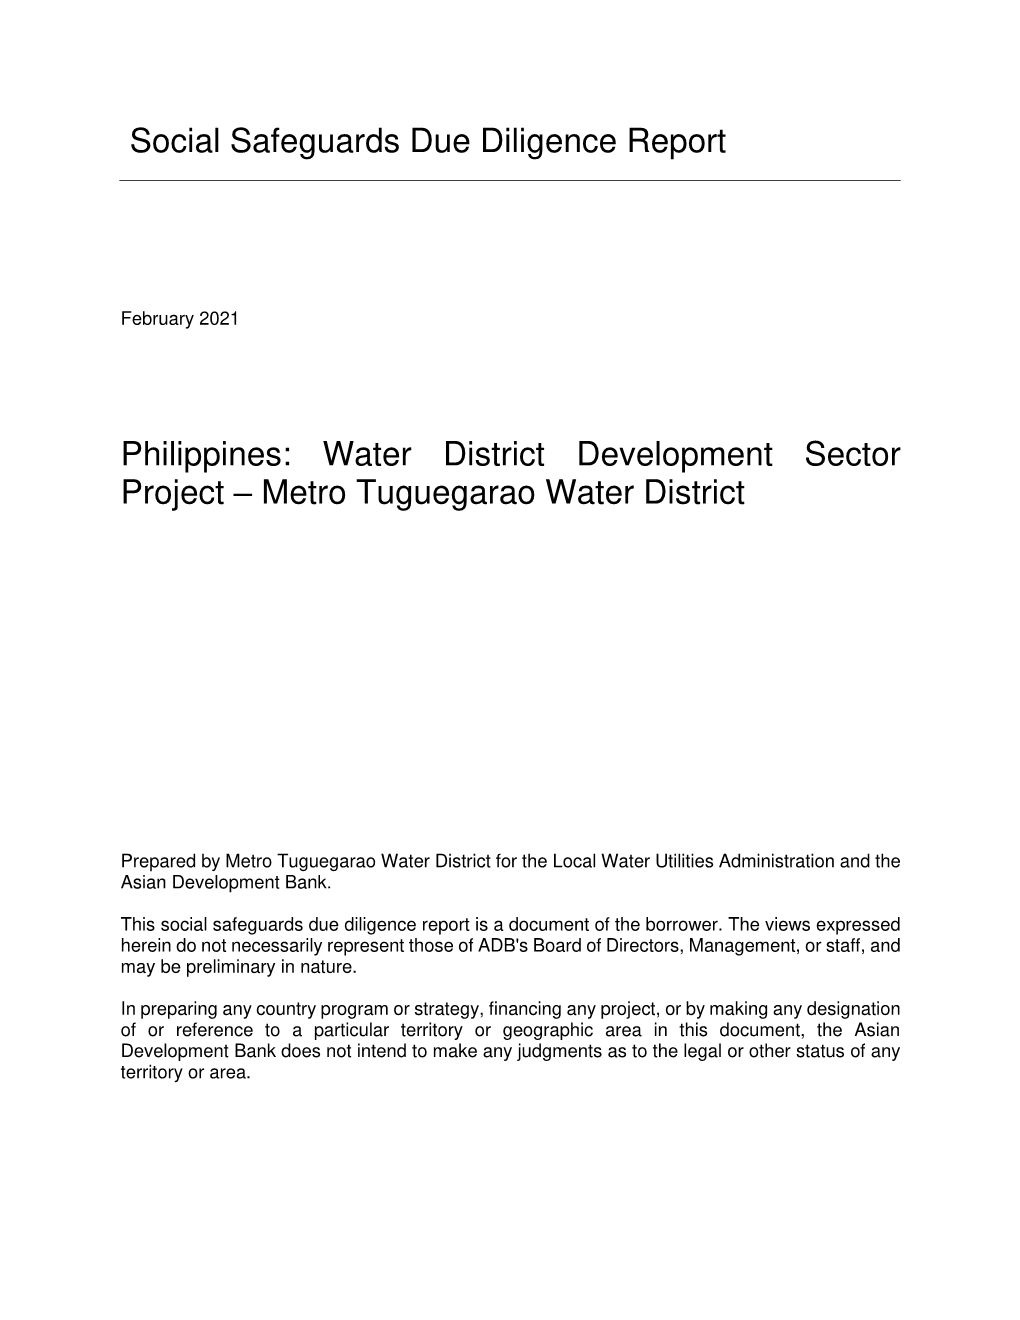 Water District Development Sector Project – Metro Tuguegarao Water District